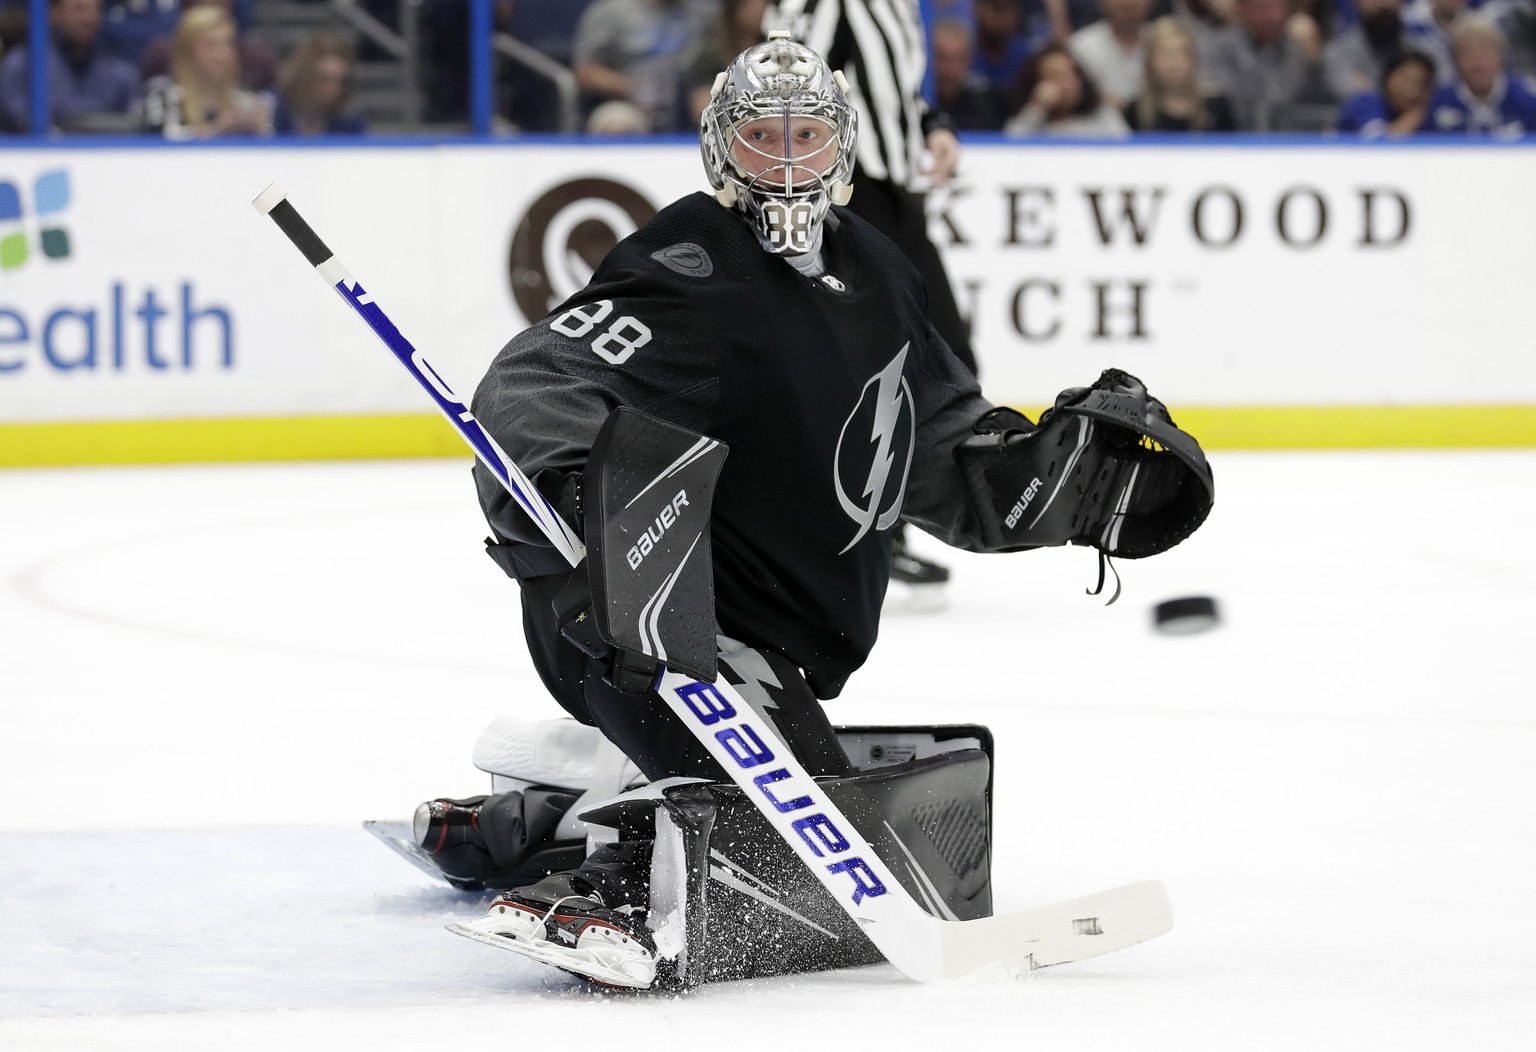 Tampa Bay Lightning goaltender Andrei Vasilevskiy makes a stick save on a shot by the St. Louis Blues during the first period of an NHL hockey game Thursday, Feb. 7, 2019, in Tampa, Fla. (AP Photo/Chr ...